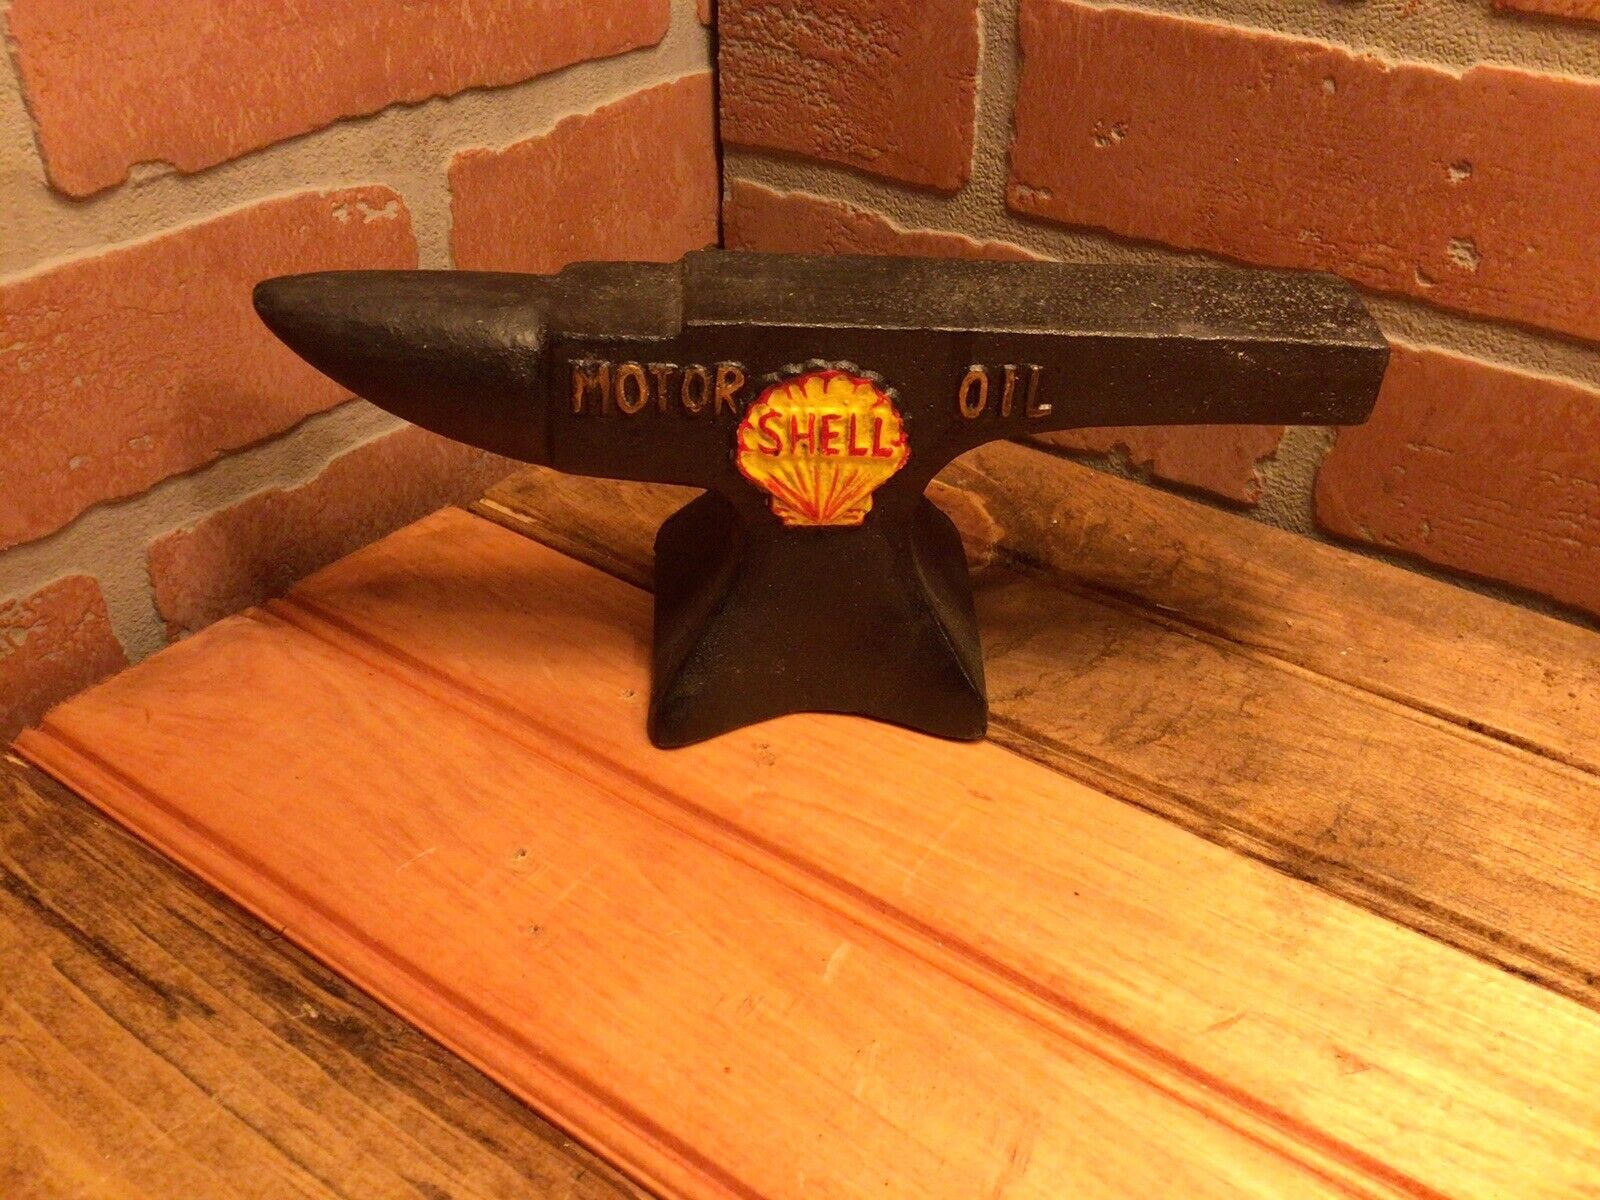 Large Heavy Shell Oil Company Anvil Doorstop Great 4 Collectors and a Great Gift